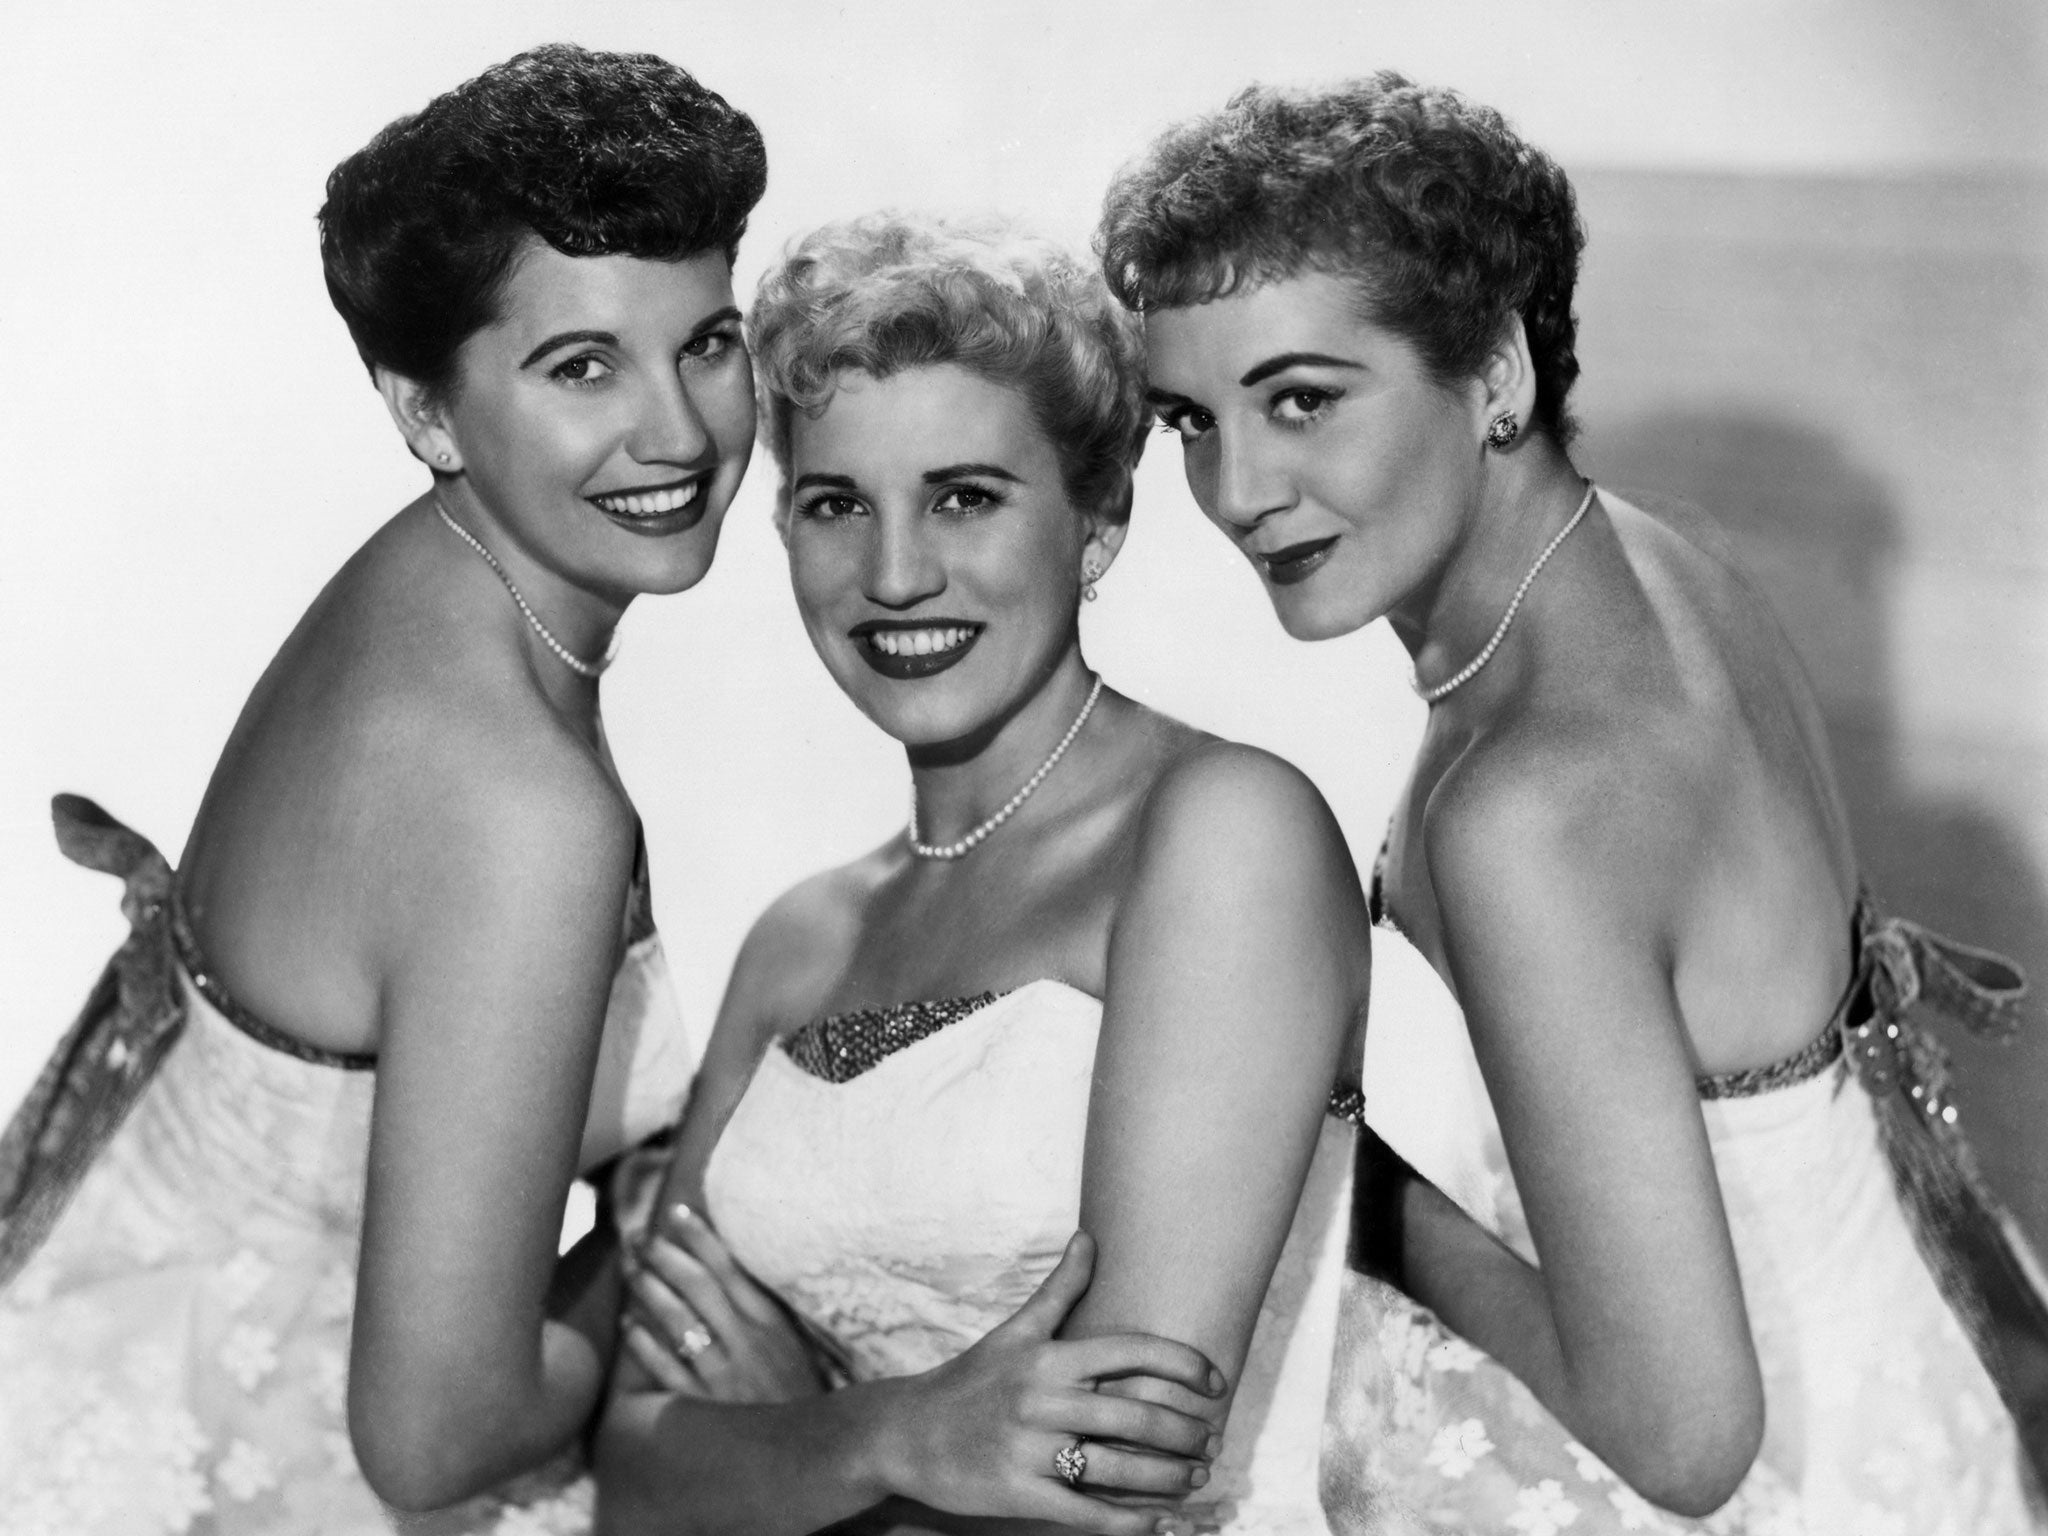 The sisters, from the left: Maxene, Patty and Laverne